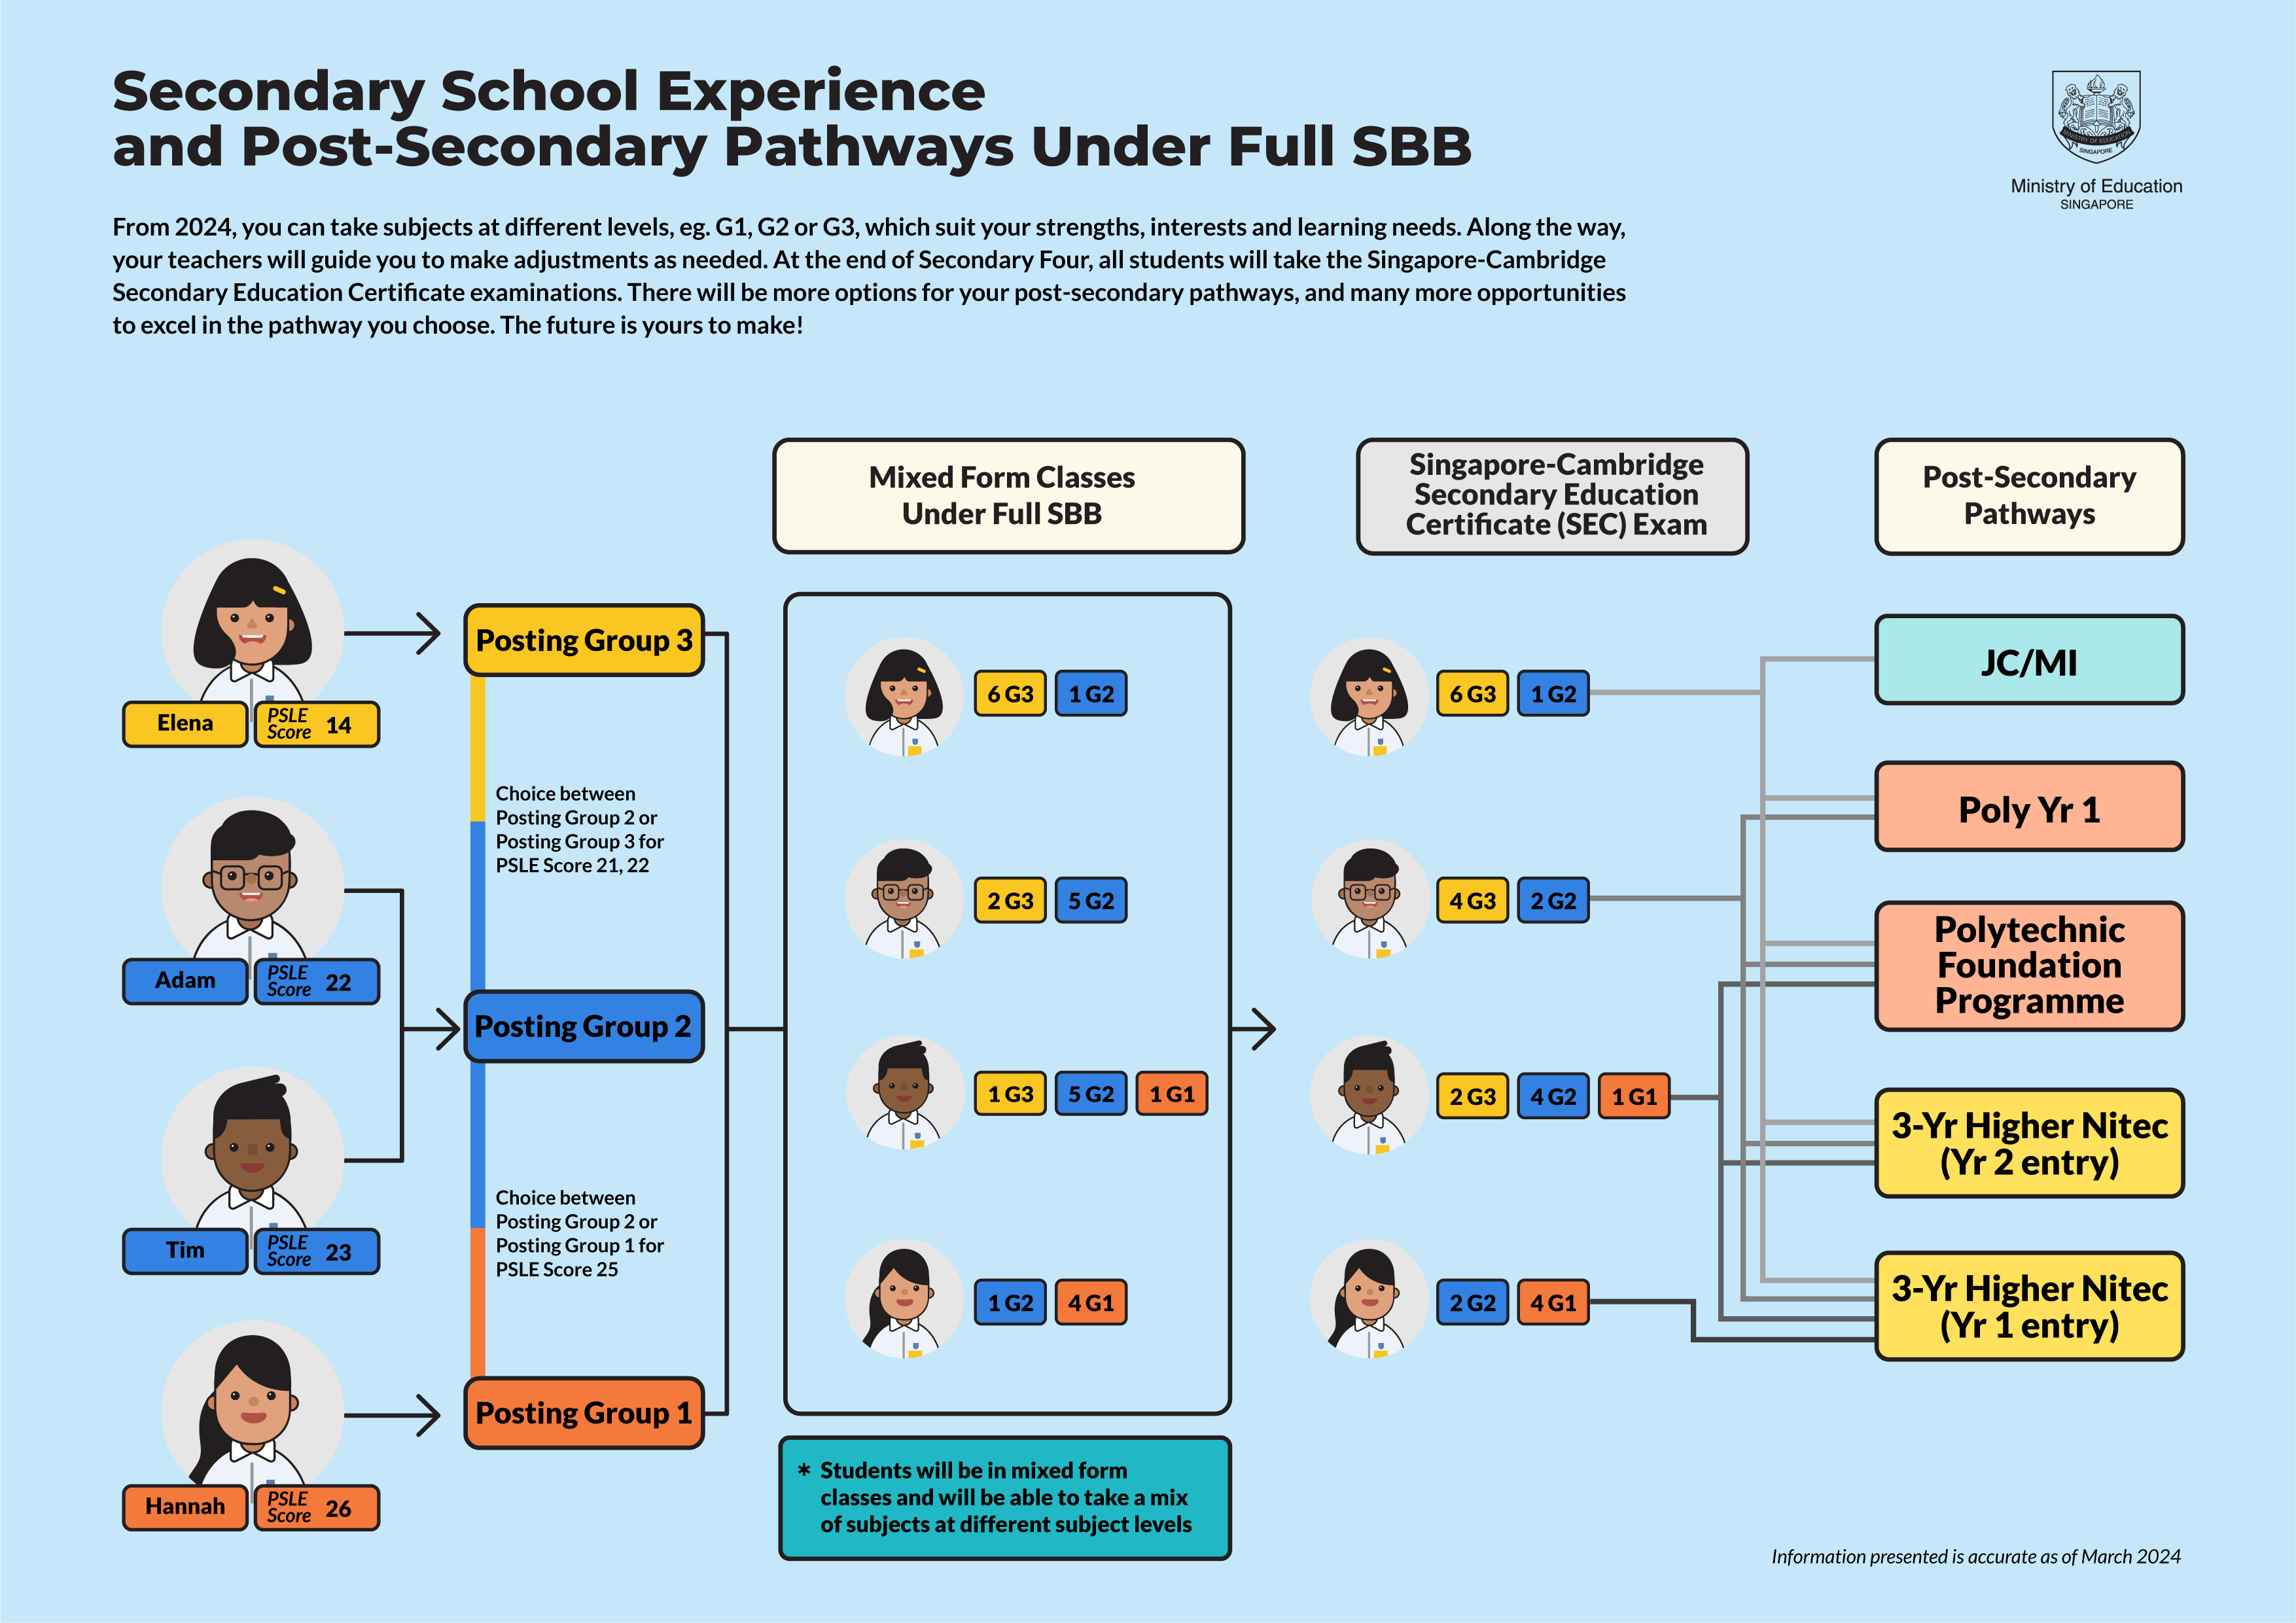 Secondary School Experience and Post-Secondary Pathways for FSBB